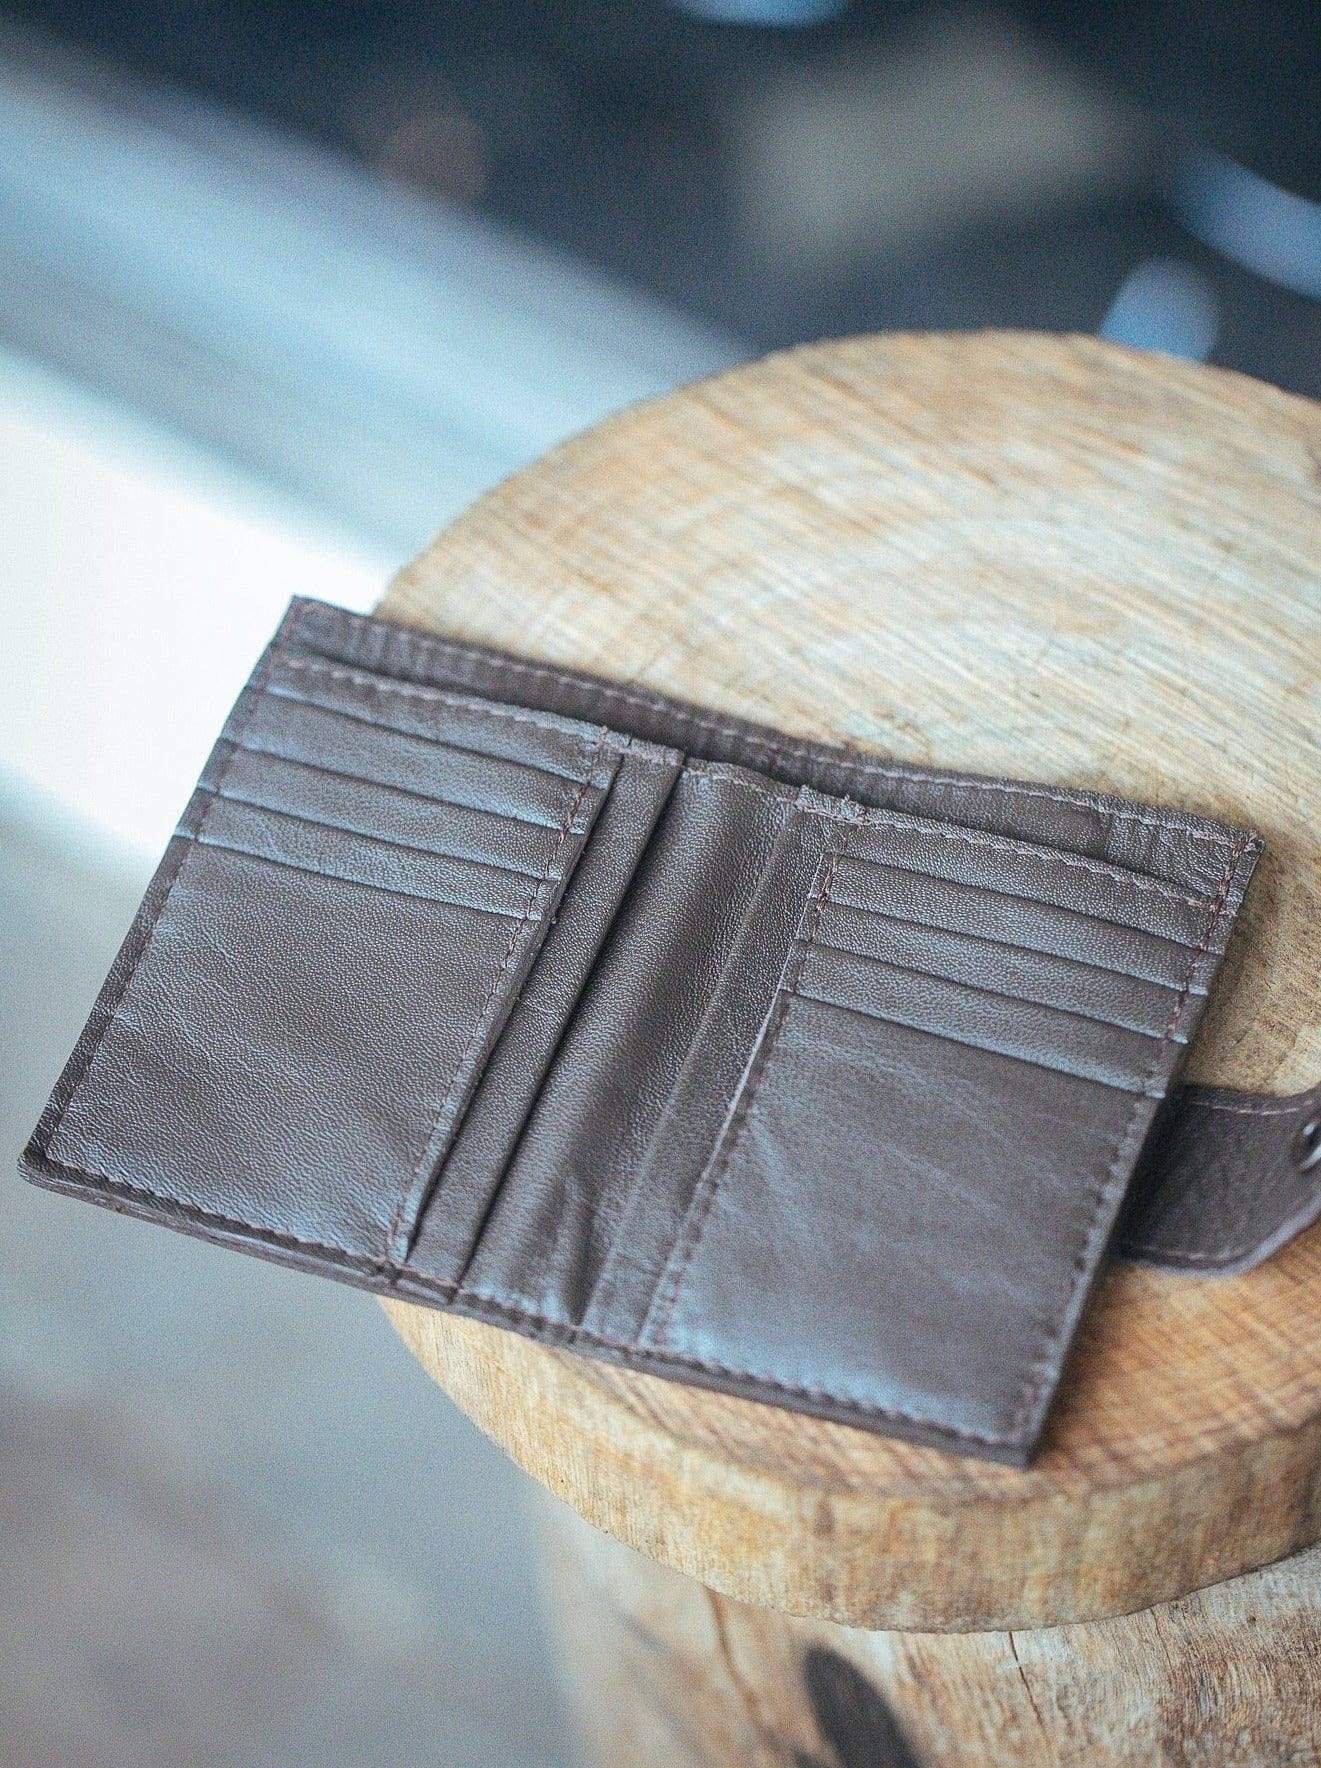 The Real McCaul Wallets The Andri Wallet - Cowhide Australian Made Australian Owned Genuine Leather Ladies Small Wallet- Made In Australia with Kangaroo and Cowhide